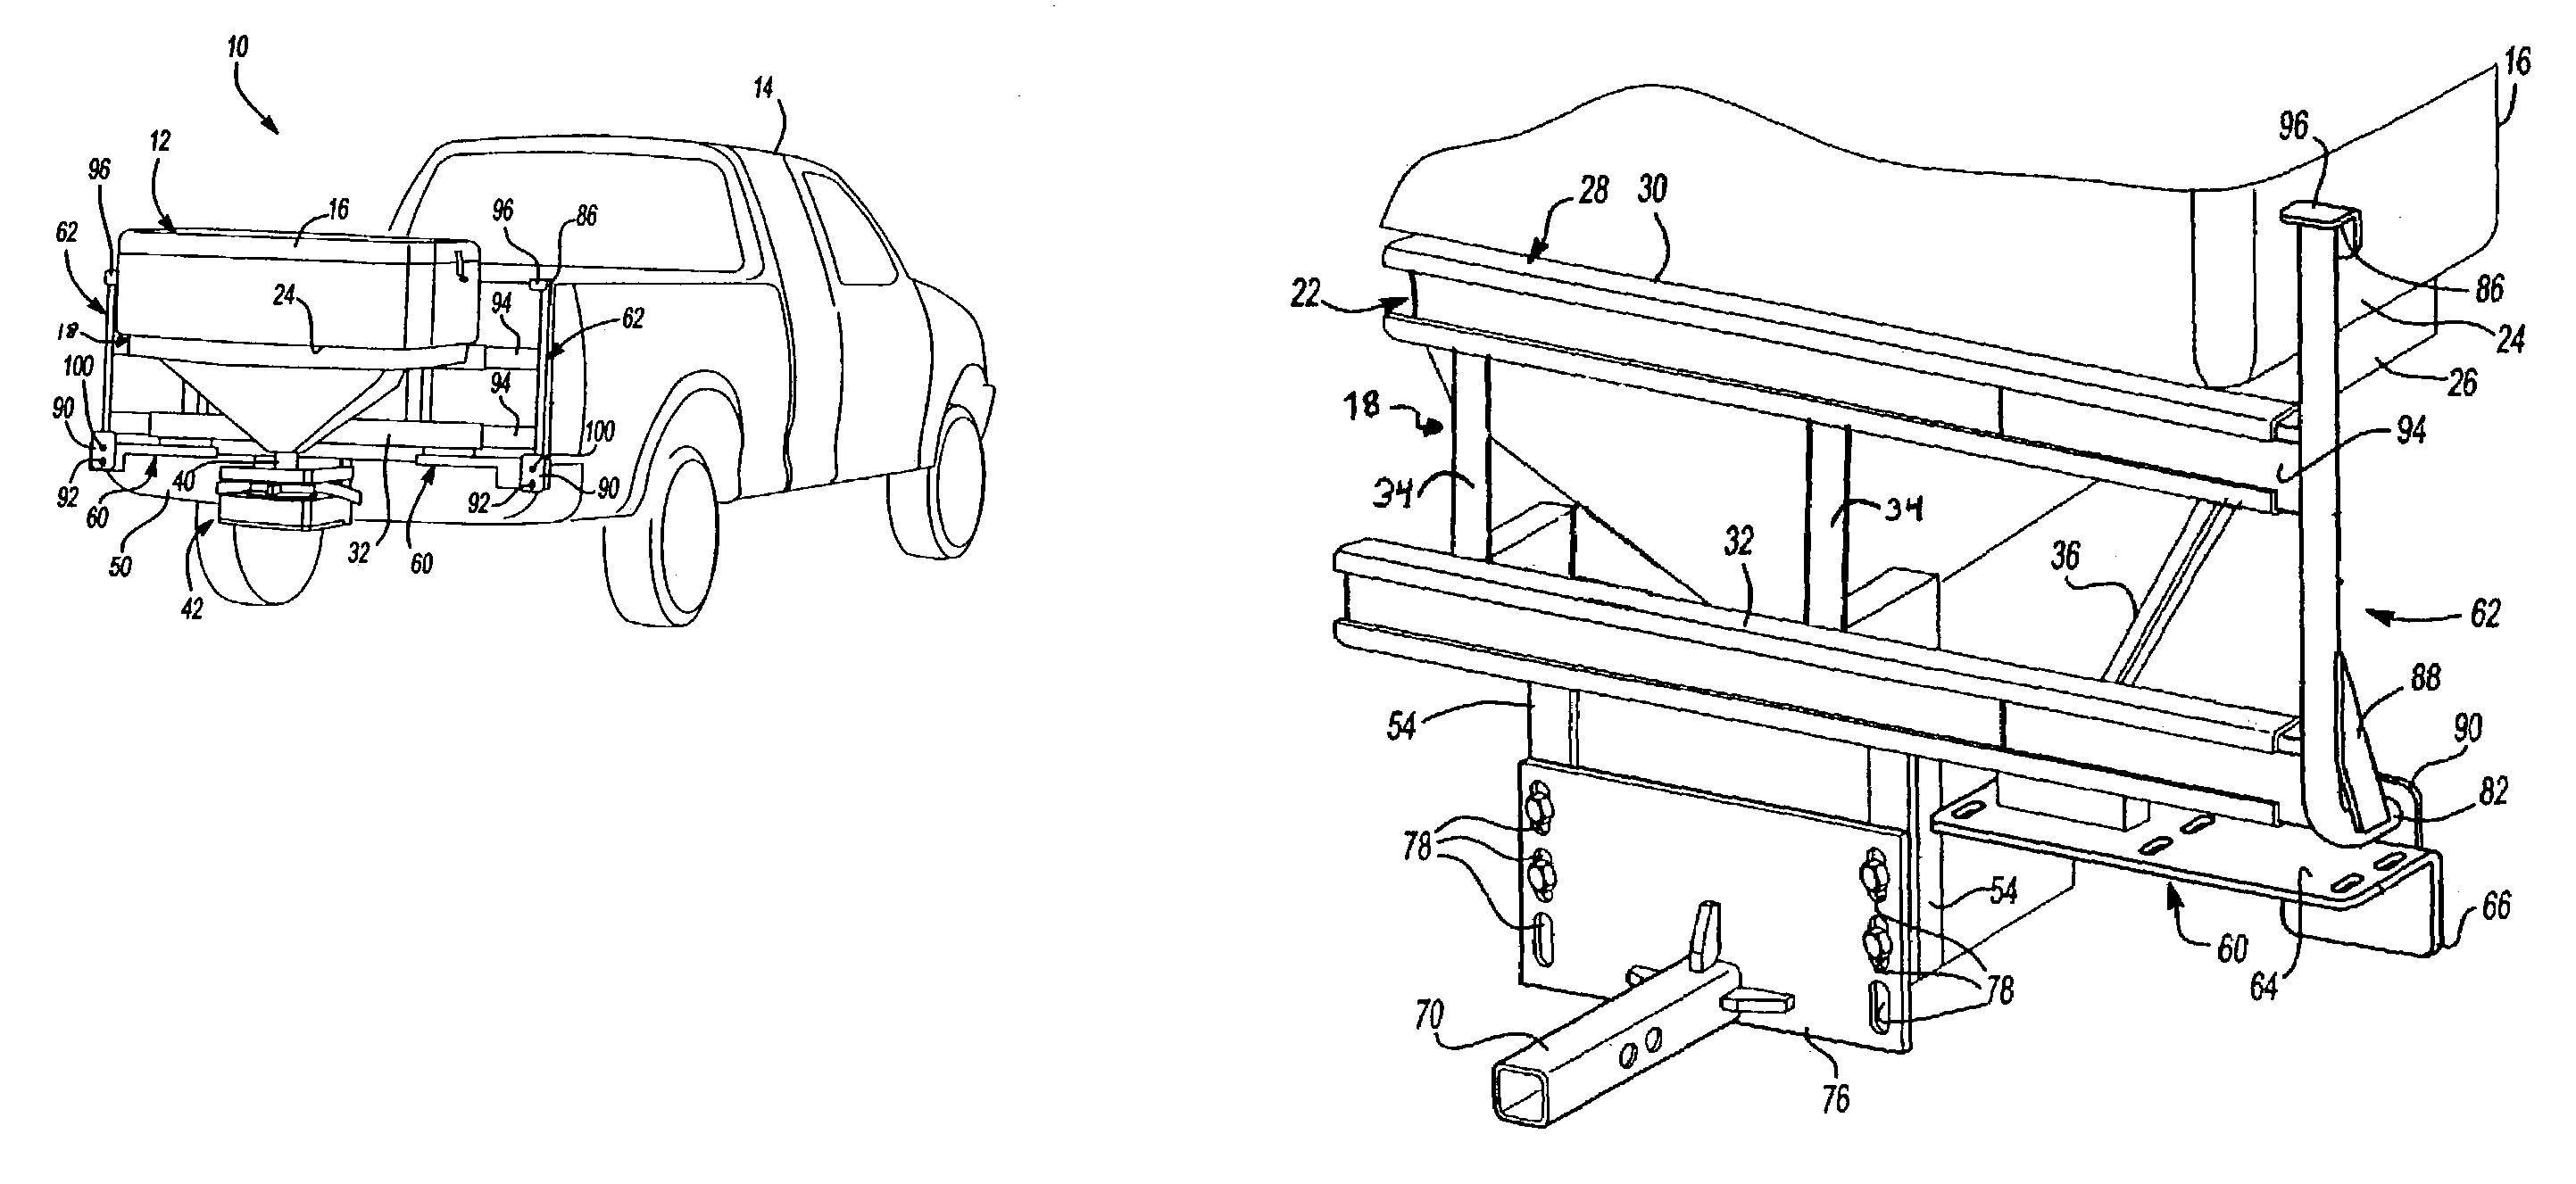 Mounting assembly for supporting a hopper and a spreading mechanism on a vehicle